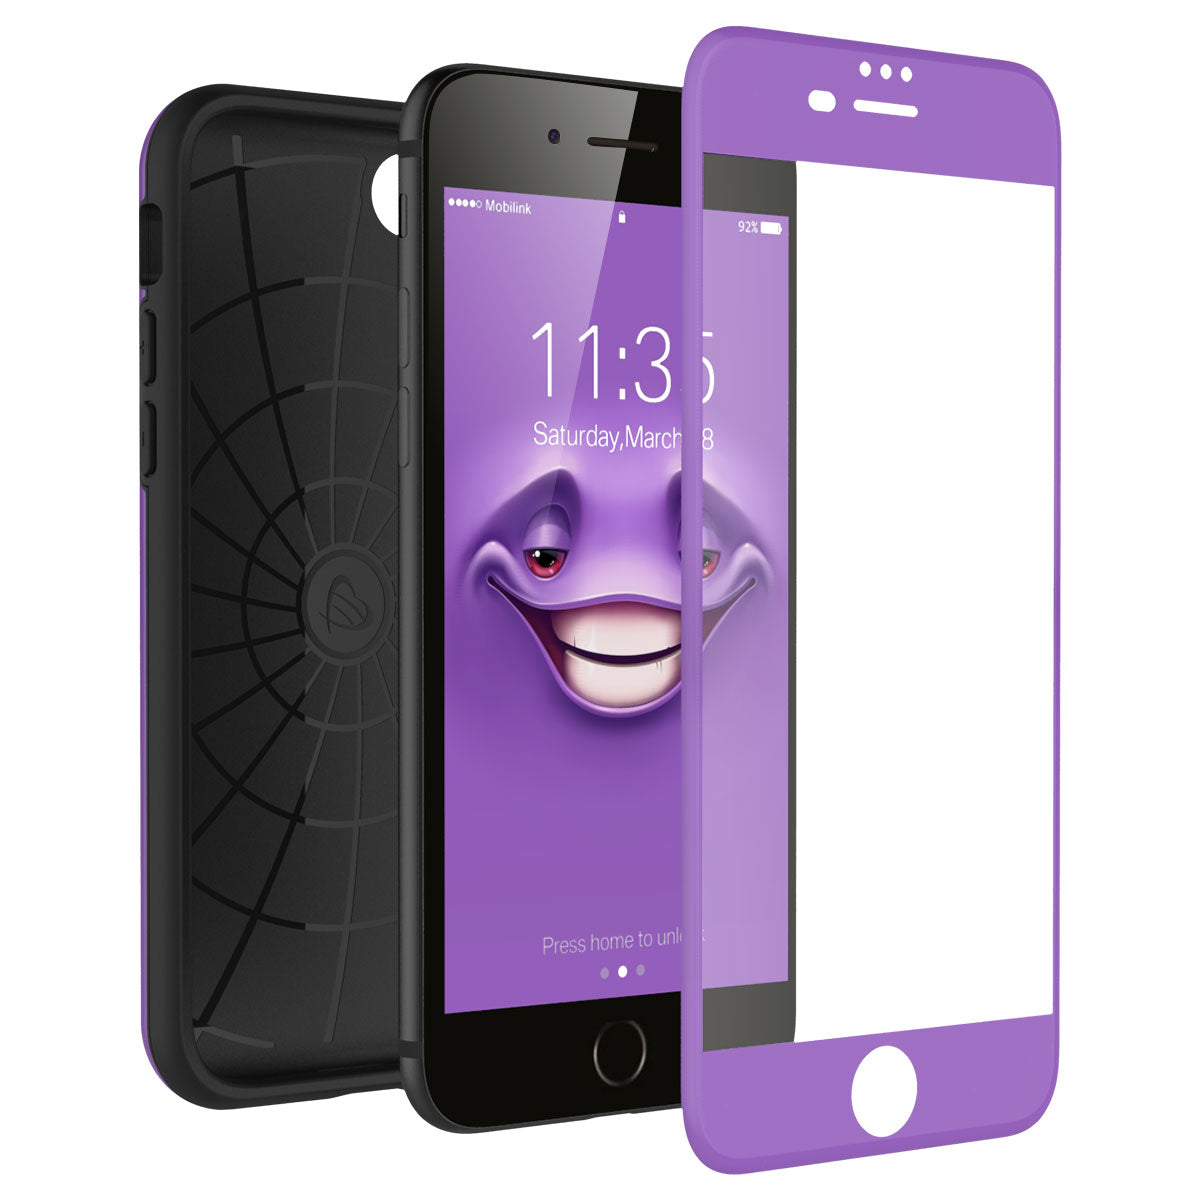 LUVVITT EMOJI Case and Tempered Glass Set for iPhone 7/8 Plus - Purple